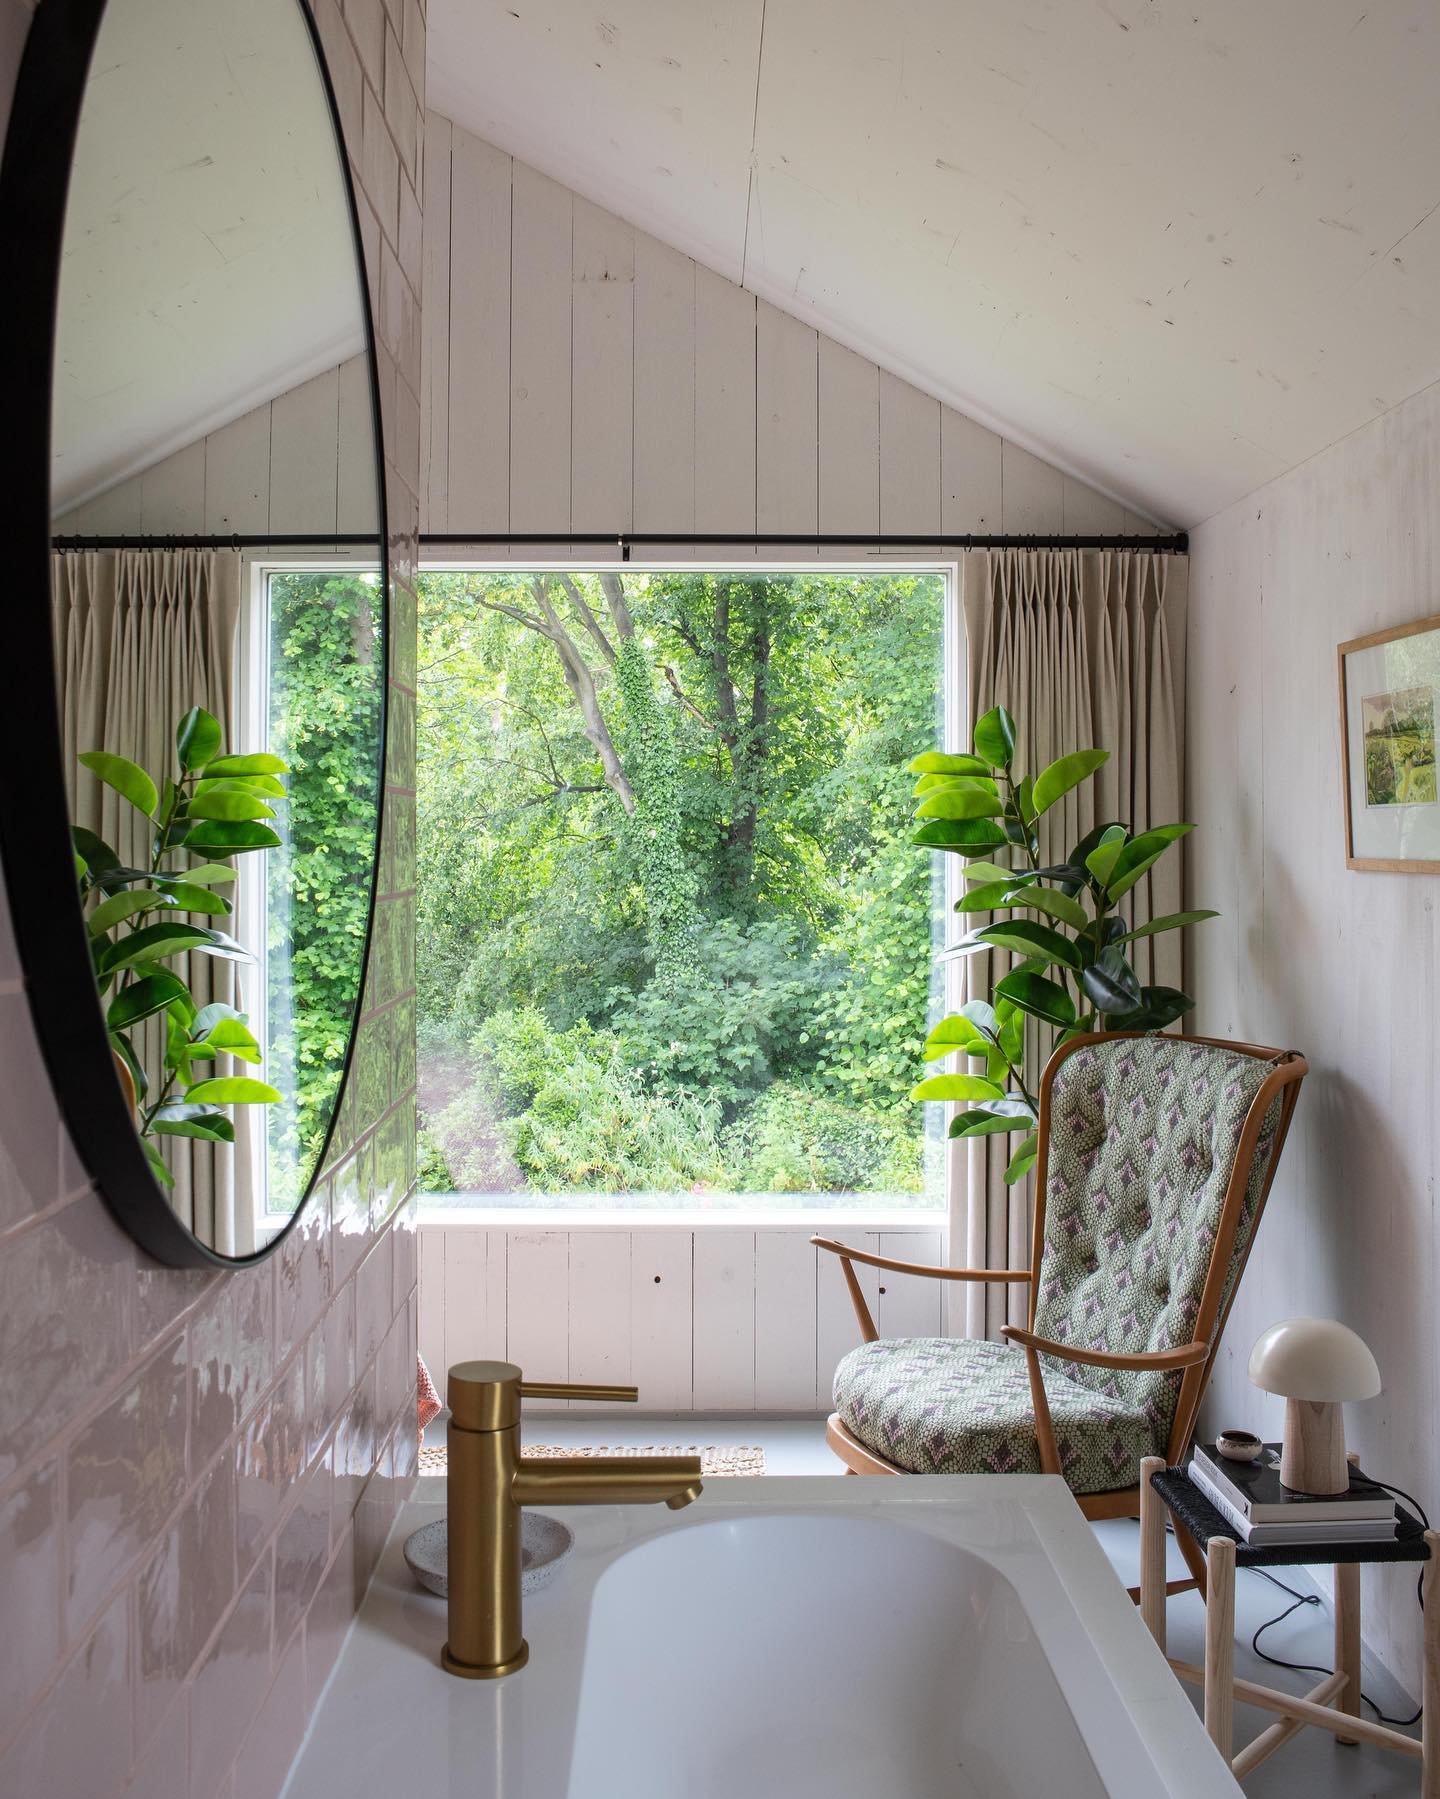 One for earth day, the most beautiful view, a perfect picture window.

We included a few of the clients existing peices of furniture in this Project and worked the design to include them, rather than changing and re buying,  friendly to the budget as